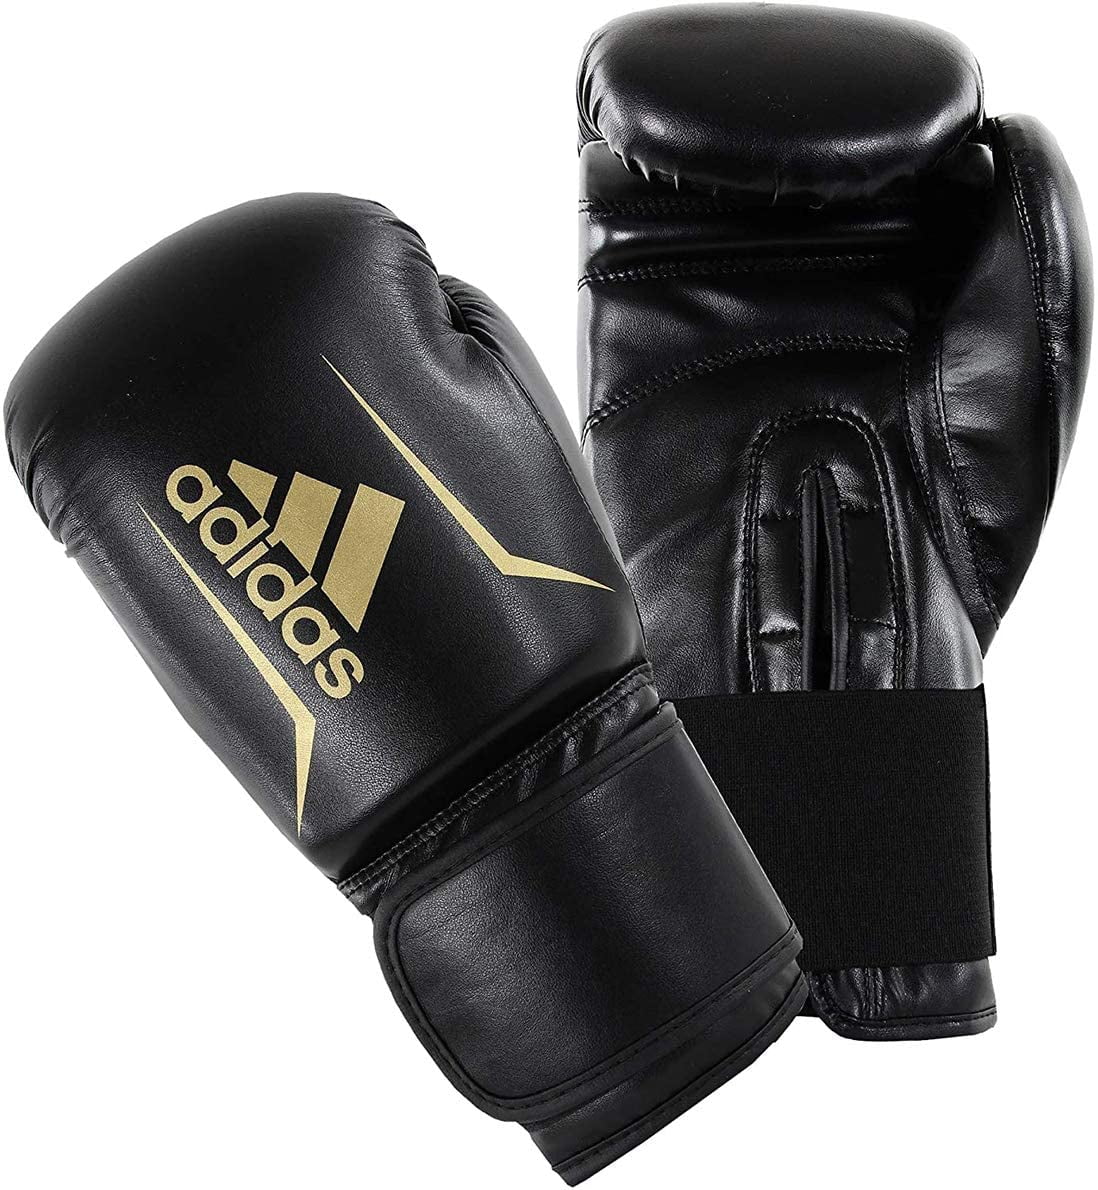 Phalanx capaciteit Snazzy adidas FLX 3.0 Speed 50 Boxing & Kickboxing Gloves for Women and Men for  Light Sparring, Training, Gym, Punching, Fitness and Heavy Bags. 10oz  ,Black,Gold - Walmart.com